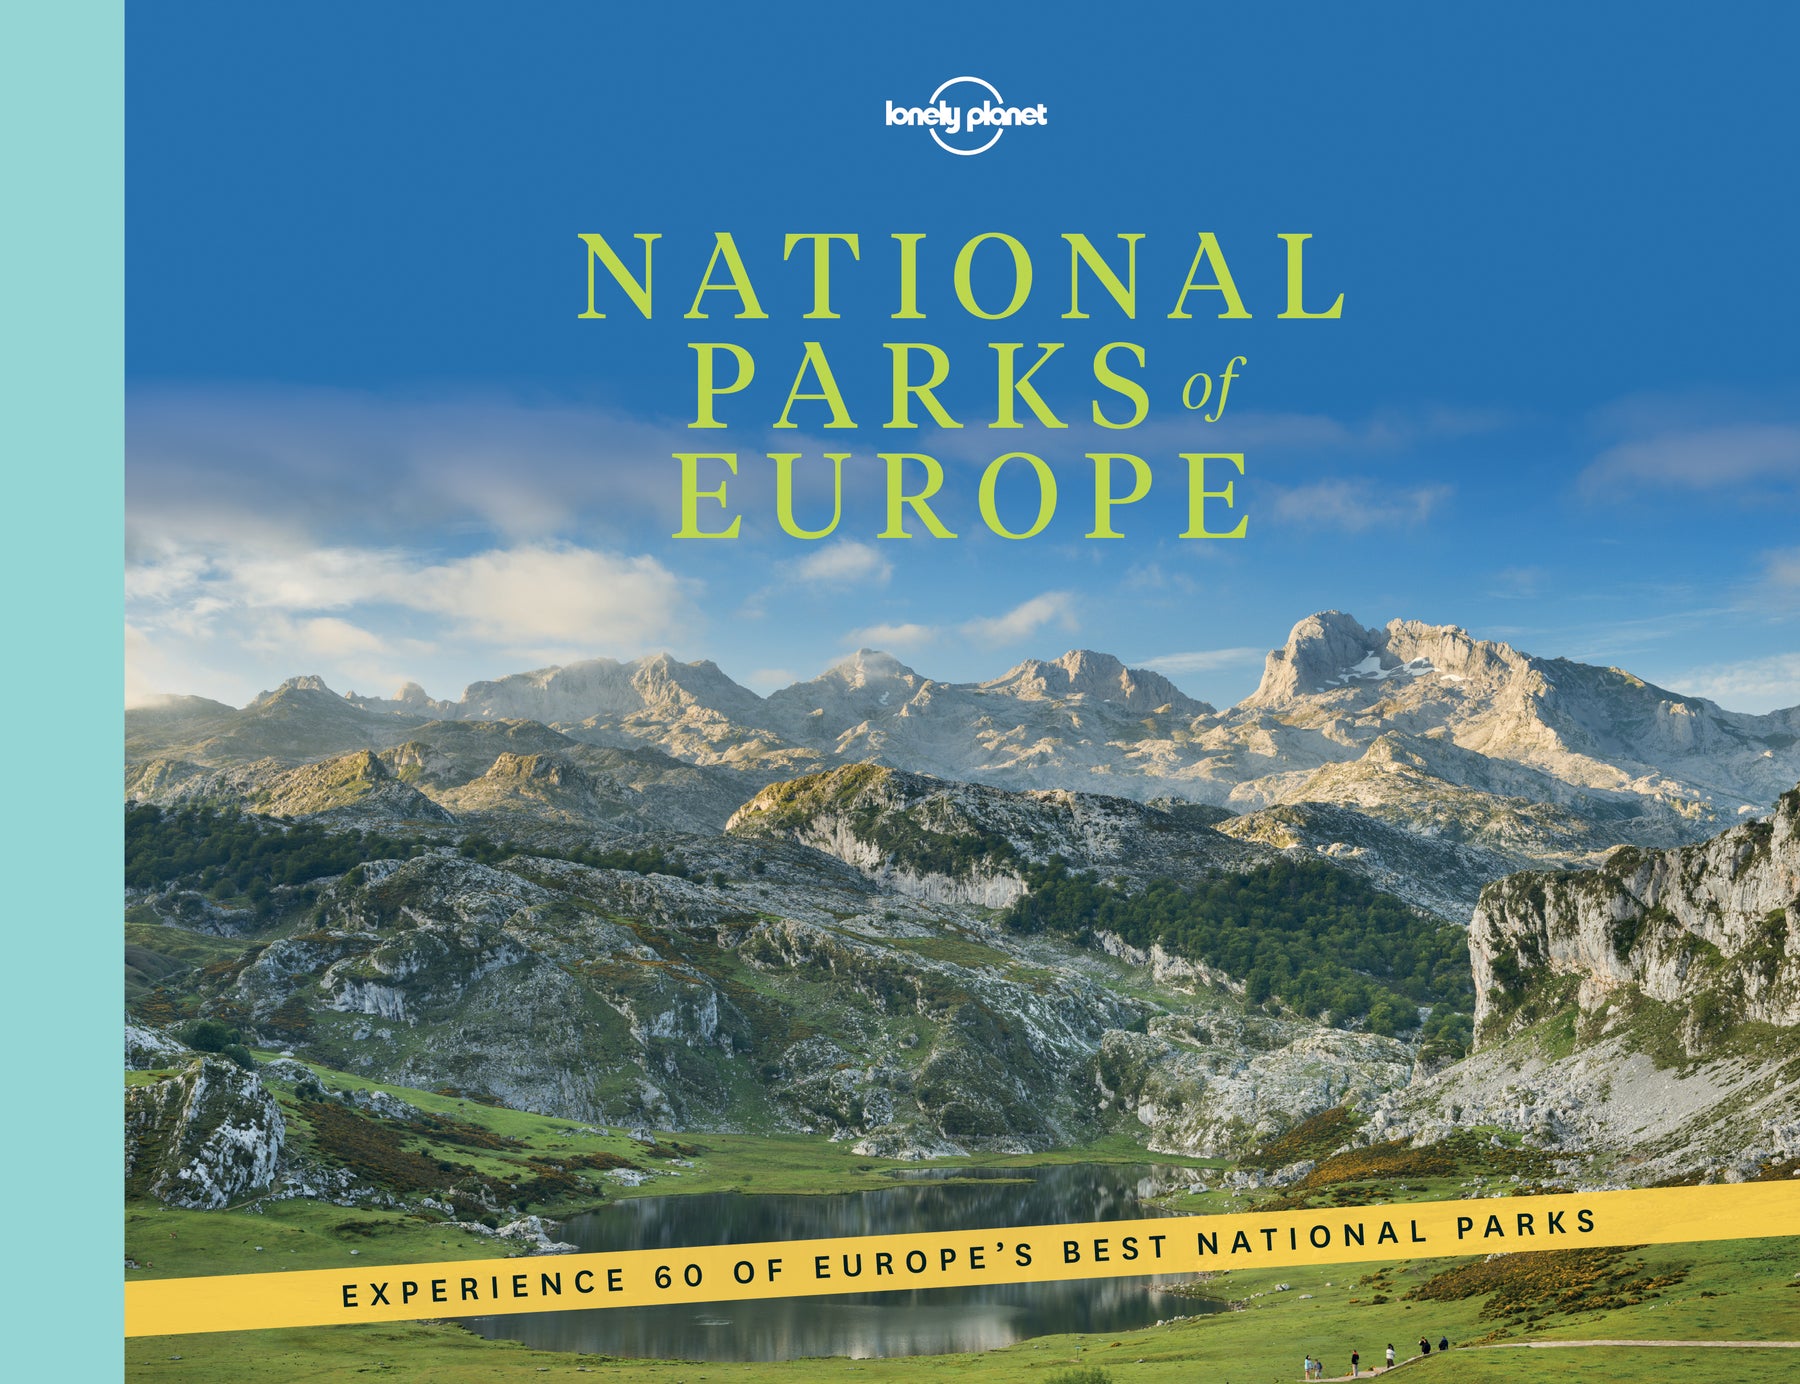 National Parks of Europe (Hardcover pictorial)